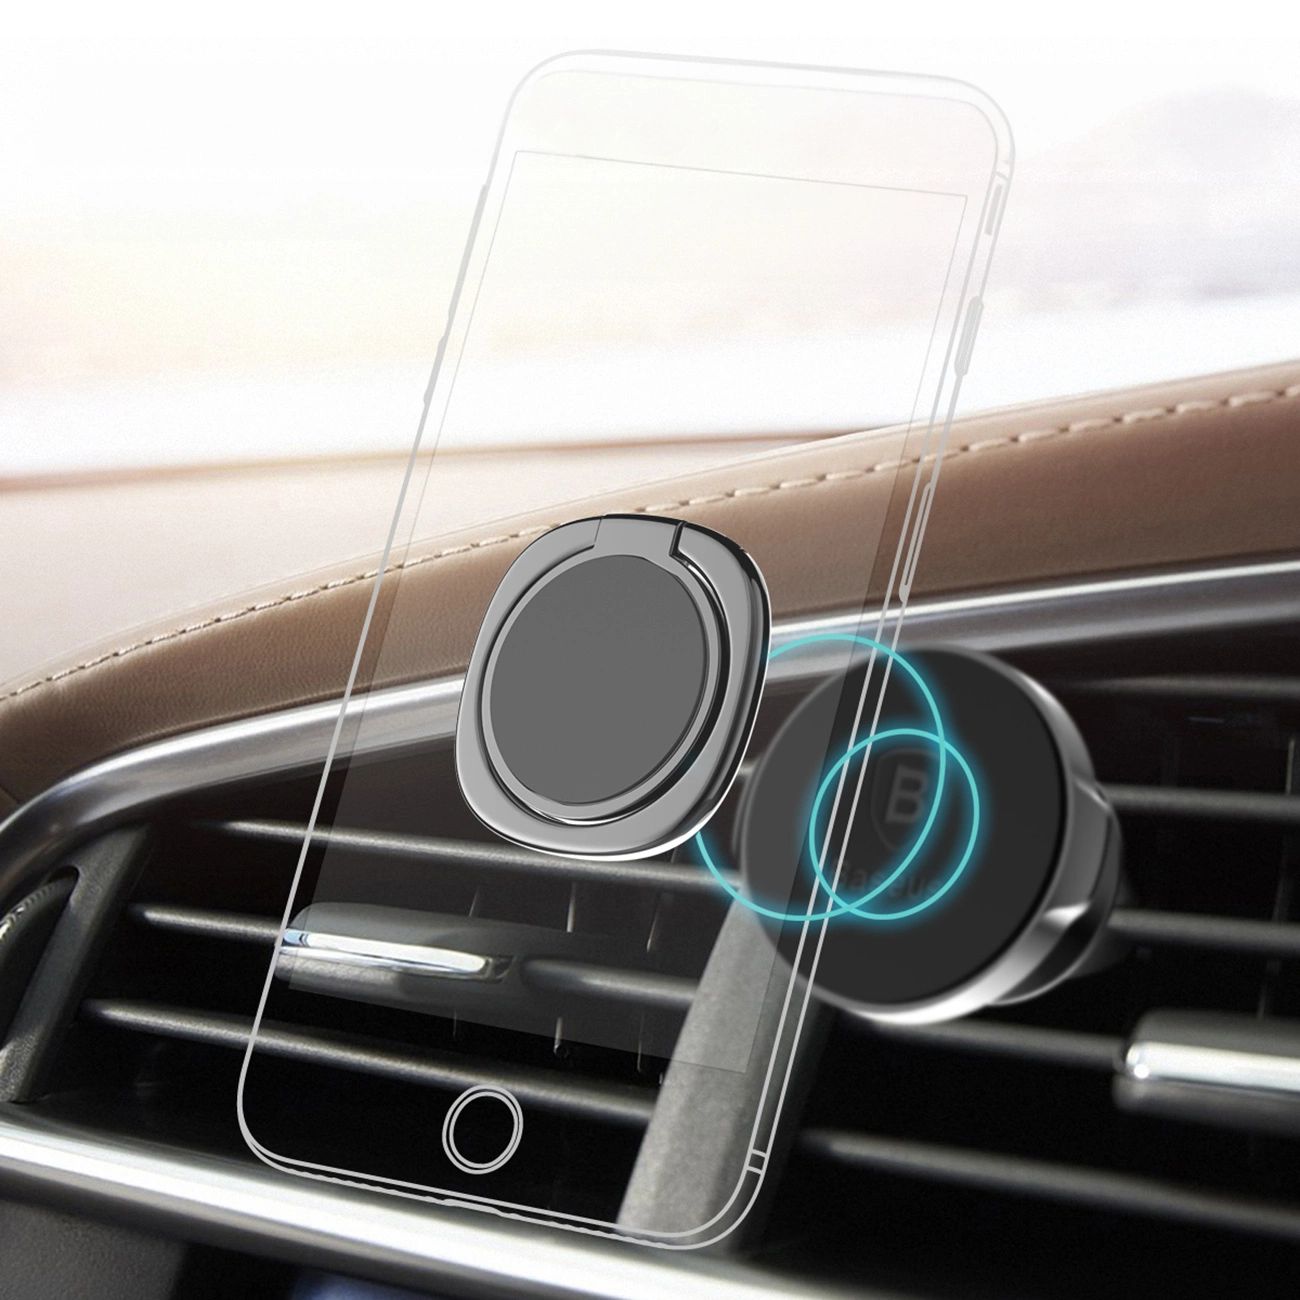 Visualization of attaching the silver Baseus Privity Ring holder to the phone holder in the car's ventilation grill